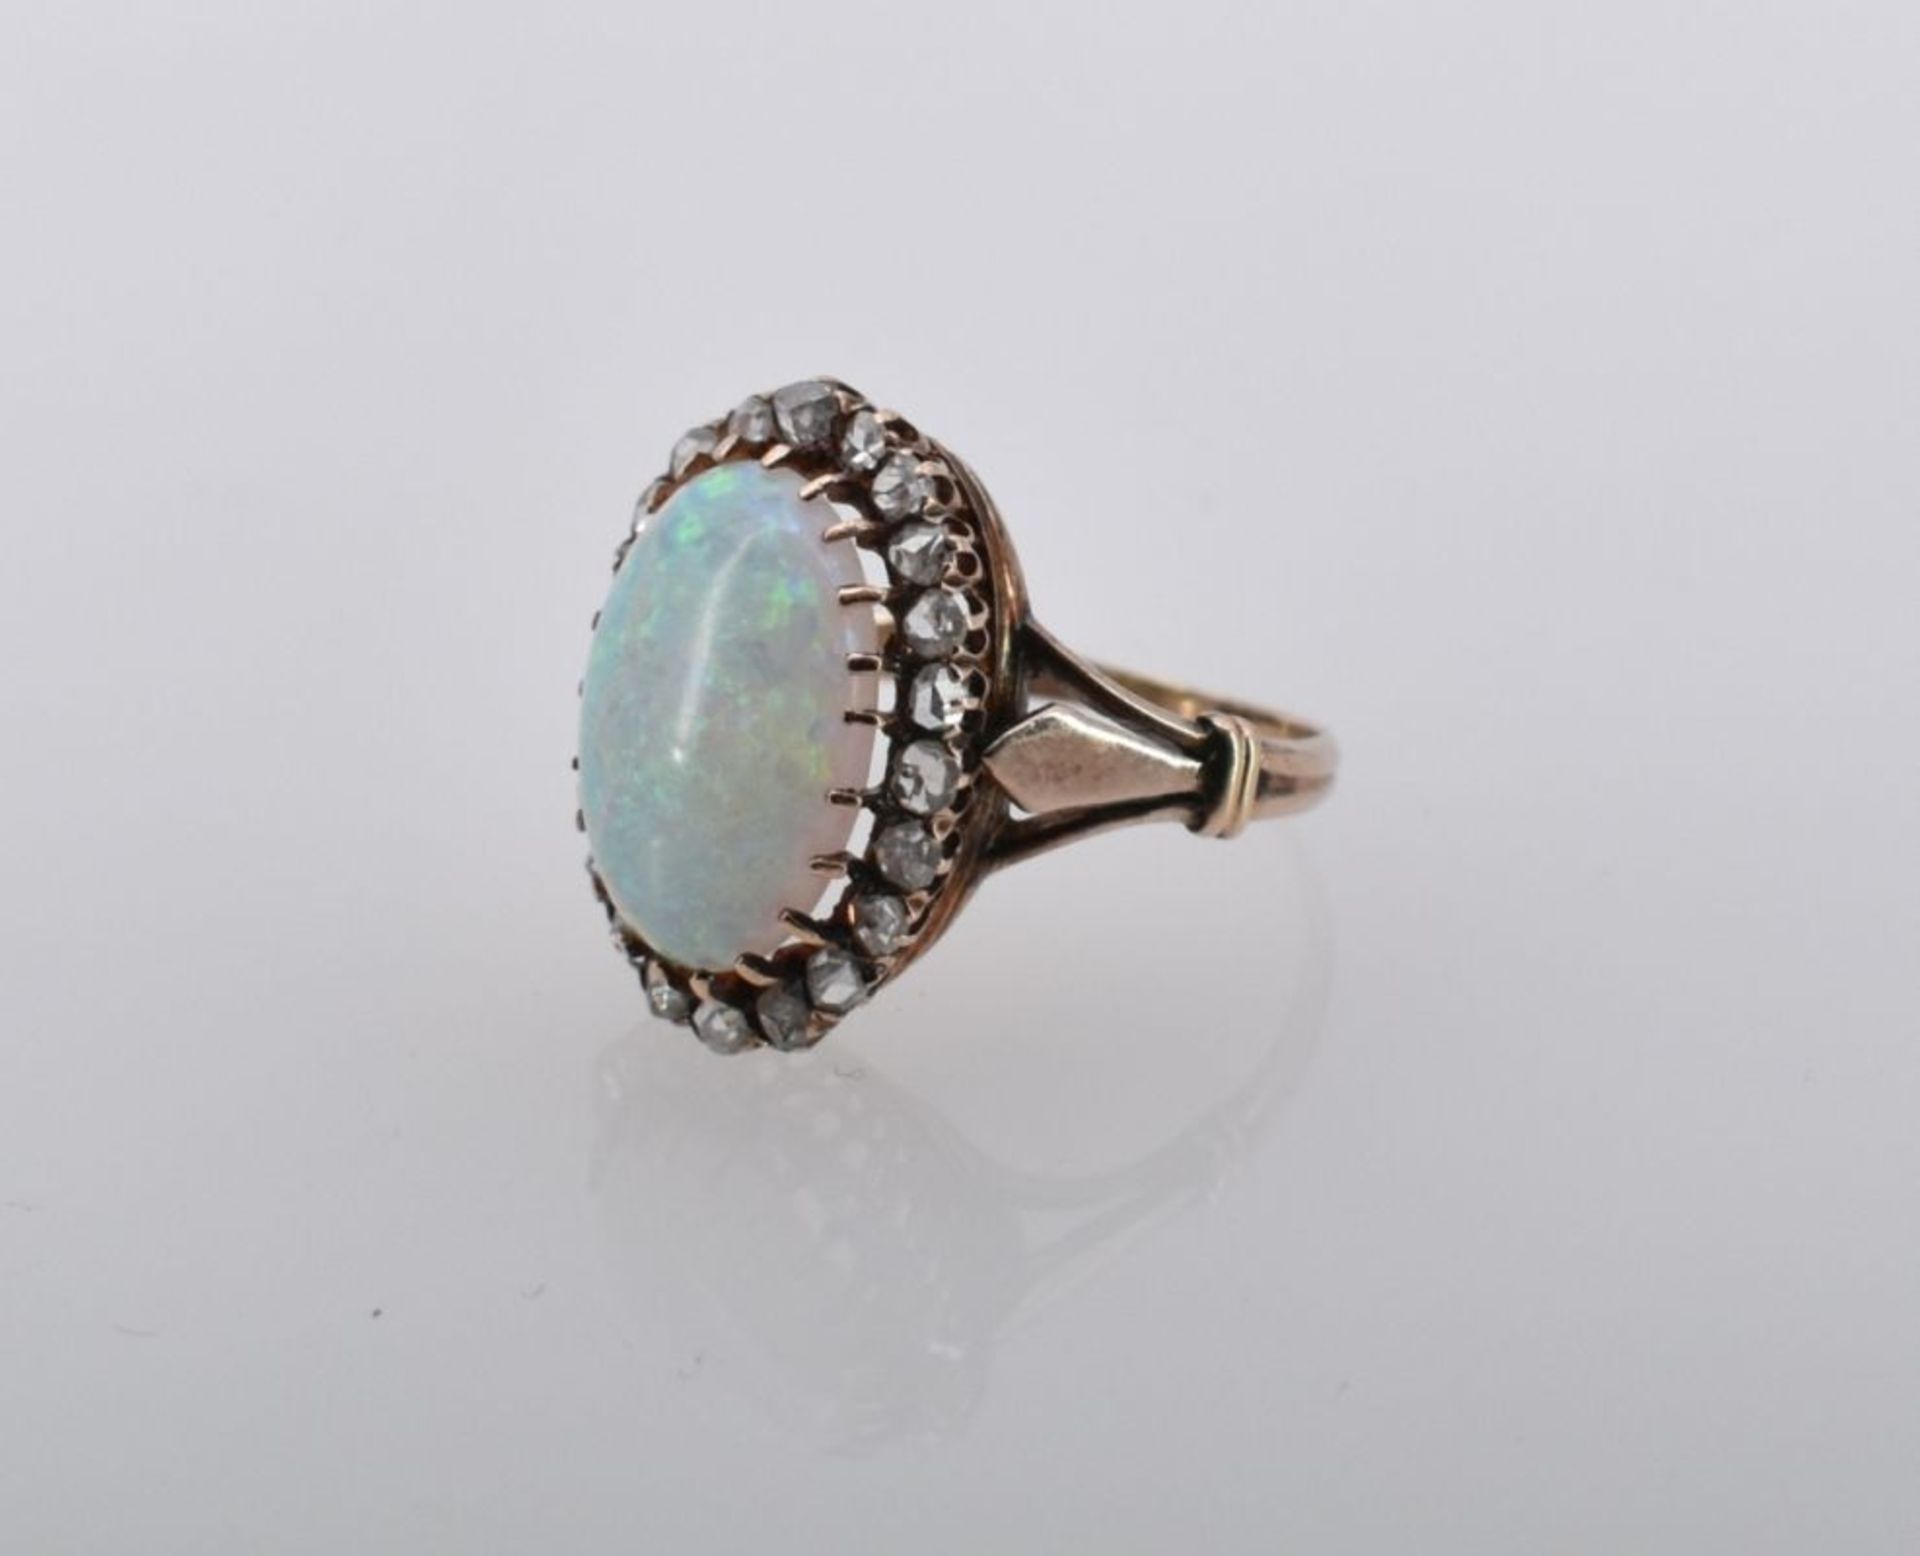 Sehr feiner Opal-Diamant-Ring, 20. Jh. - Image 2 of 3